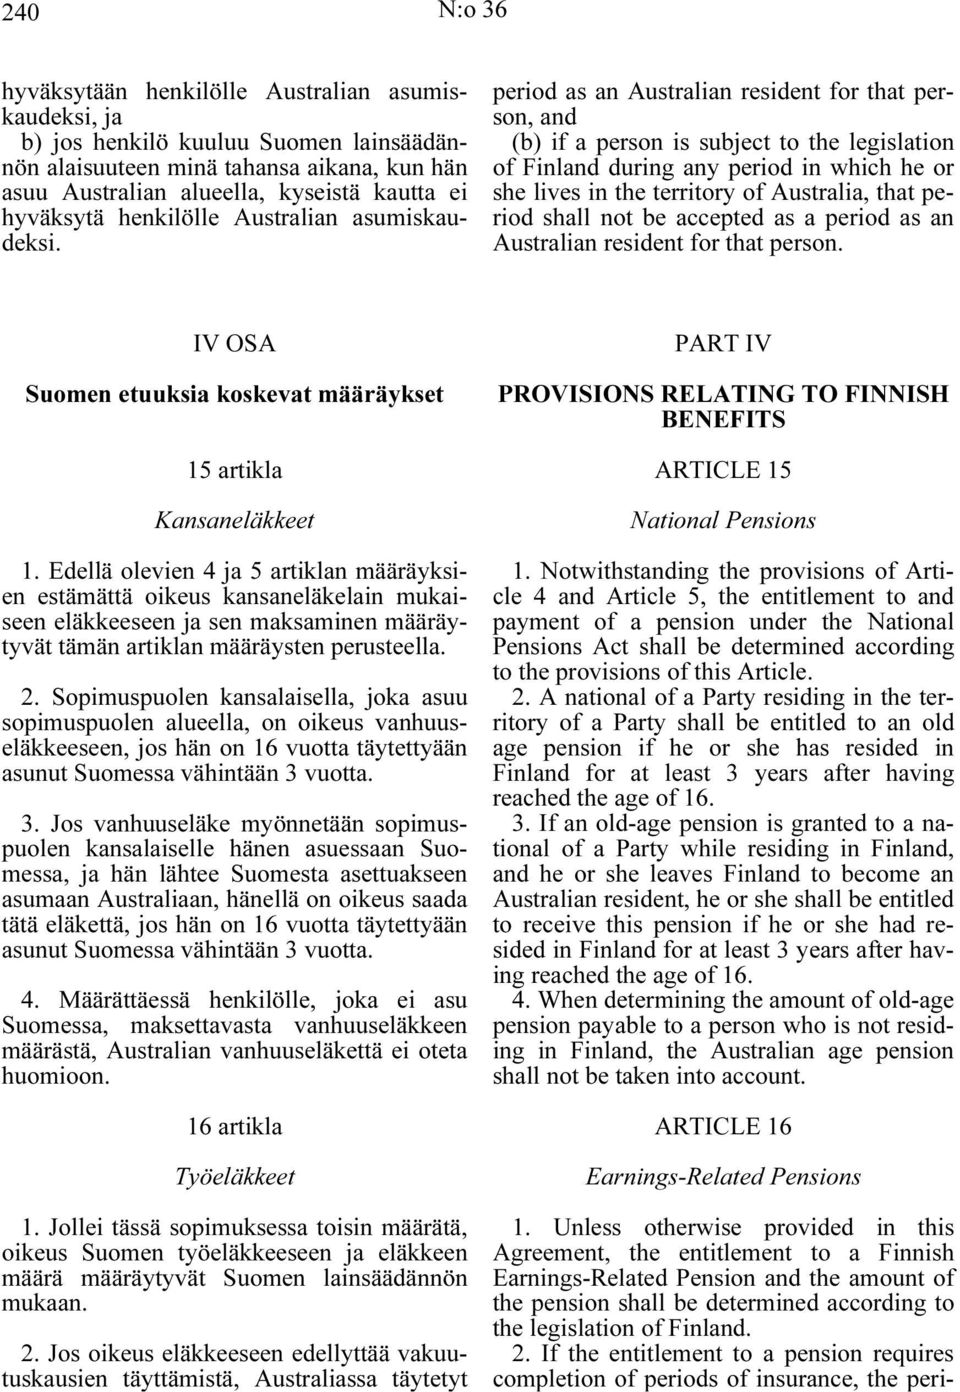 period as an Australian resident for that person, and (b) if a person is subject to the legislation of Finland during any period in which he or she lives in the territory of Australia, that period